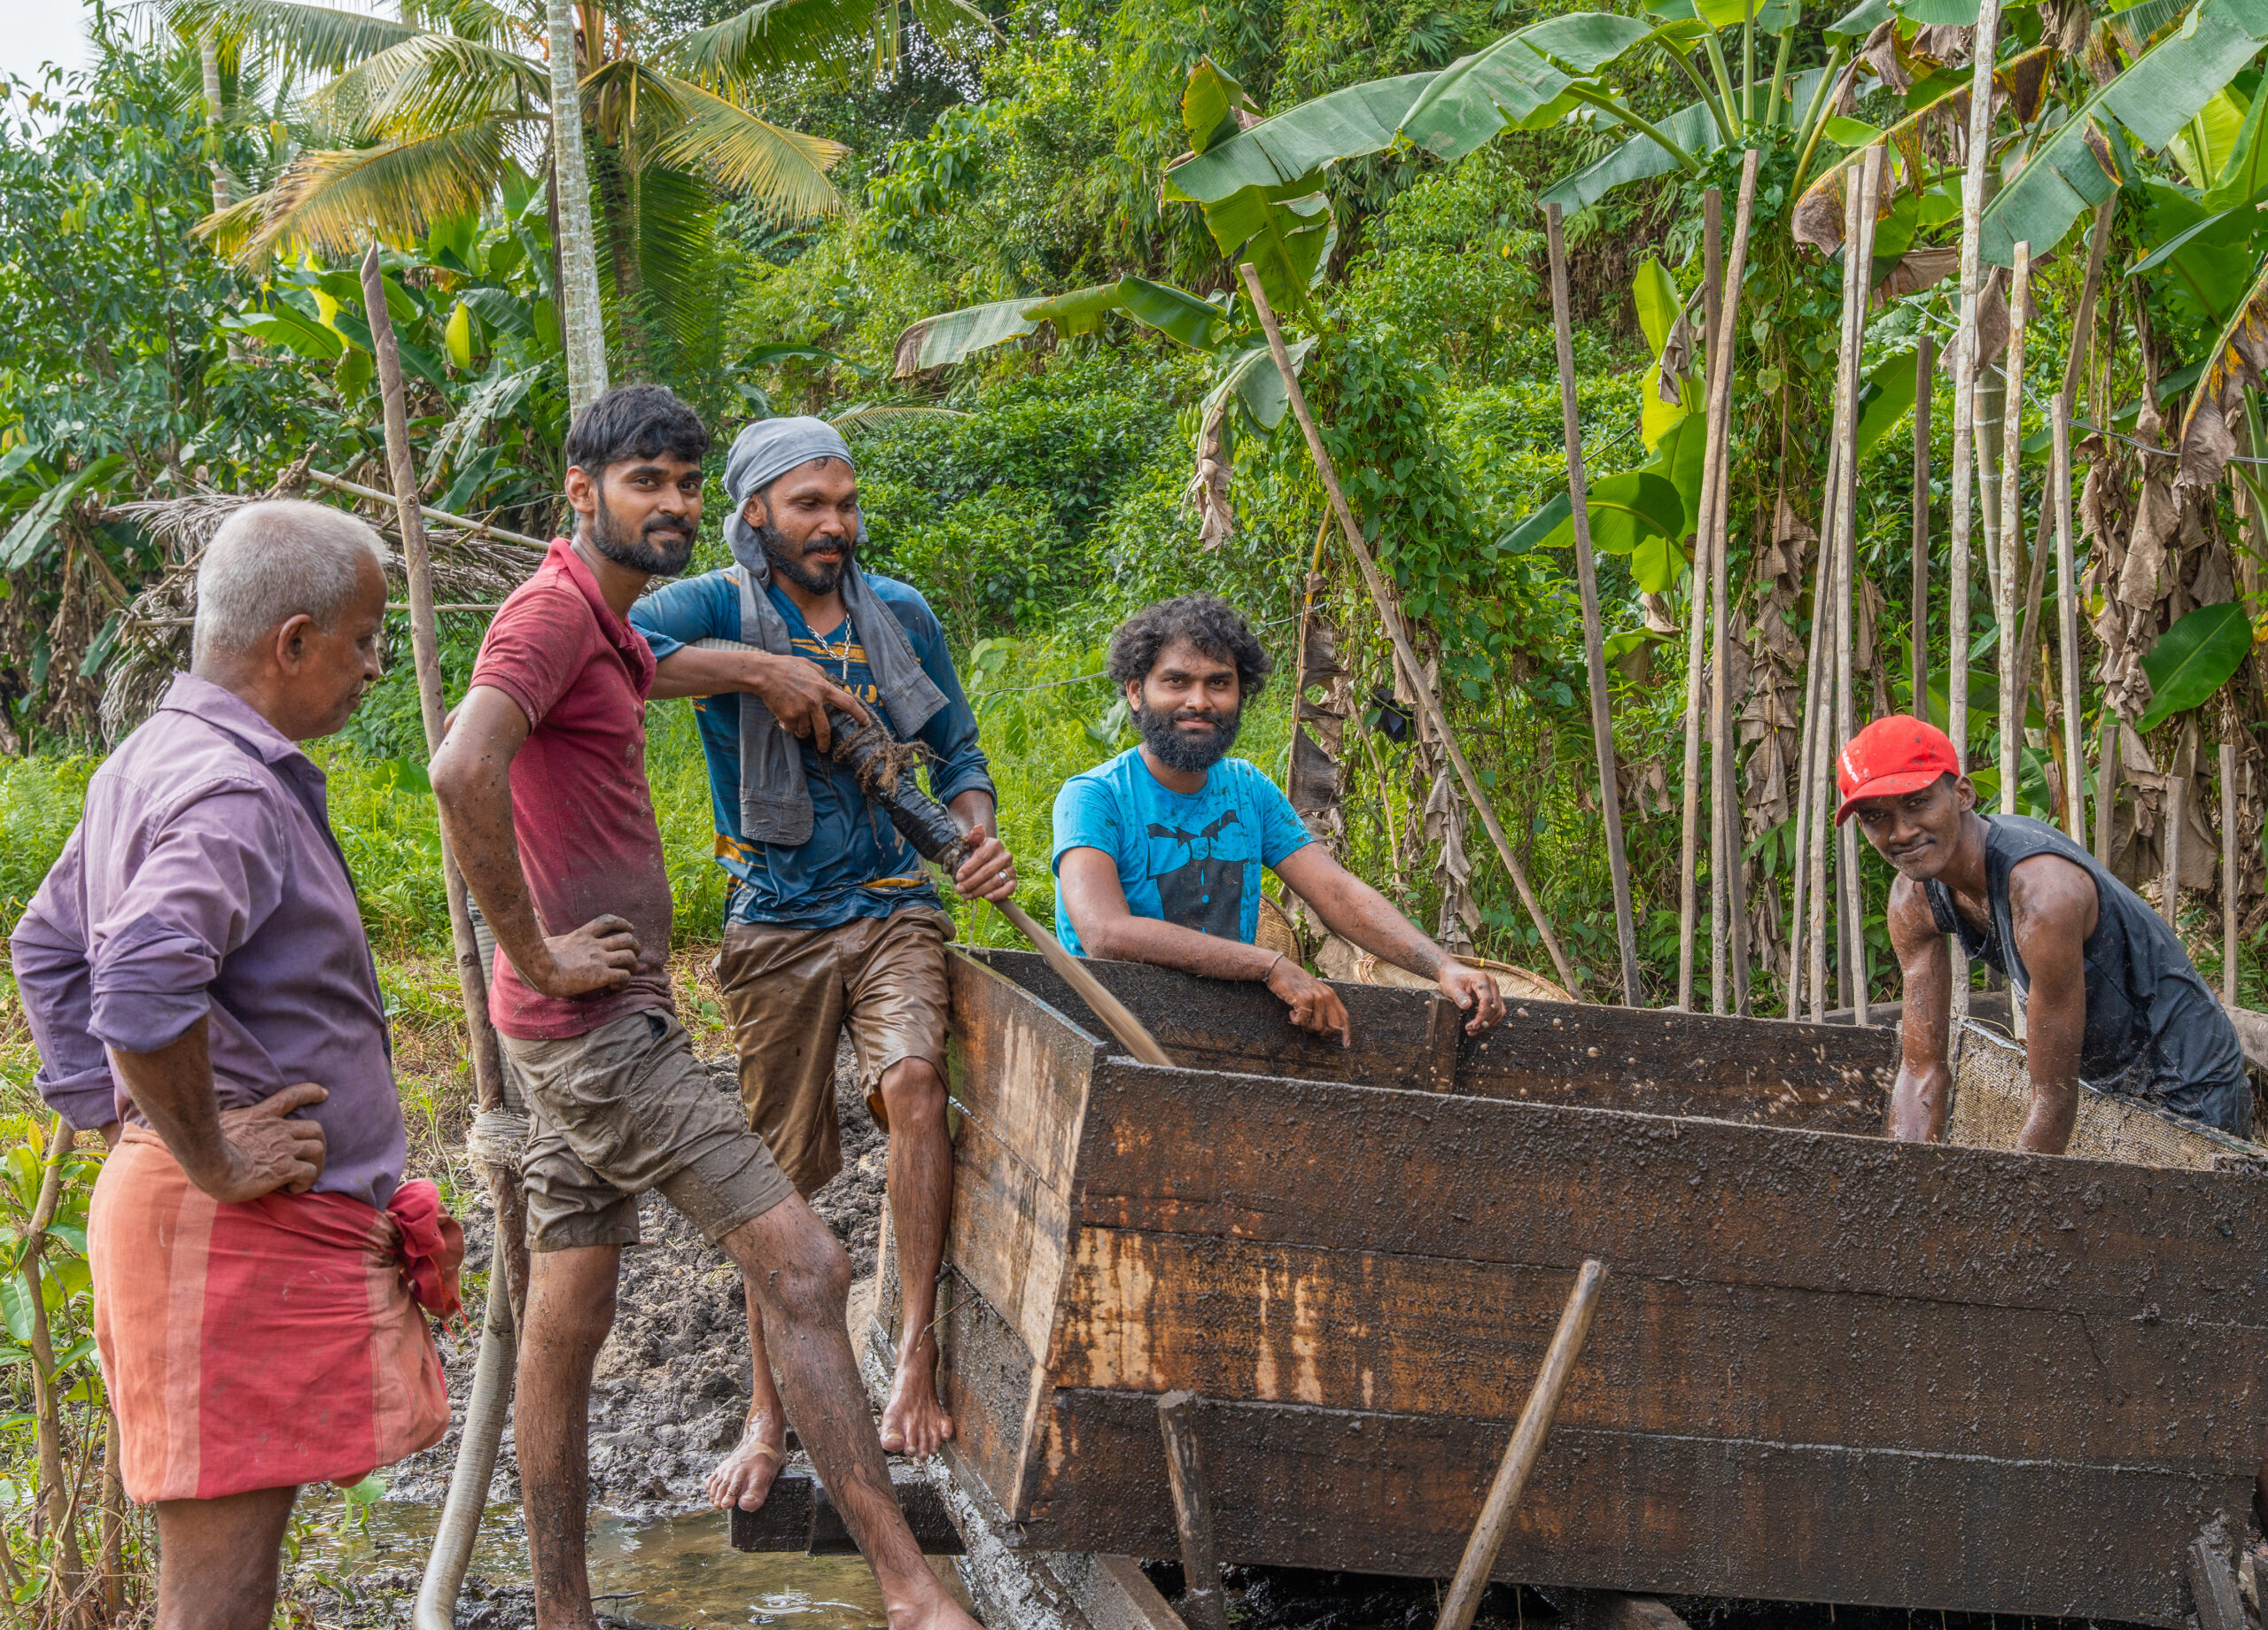 Group of Sri Lankan men smiling and crowding around a gem washing slough and machinery in a mining area in Sri Lanka.